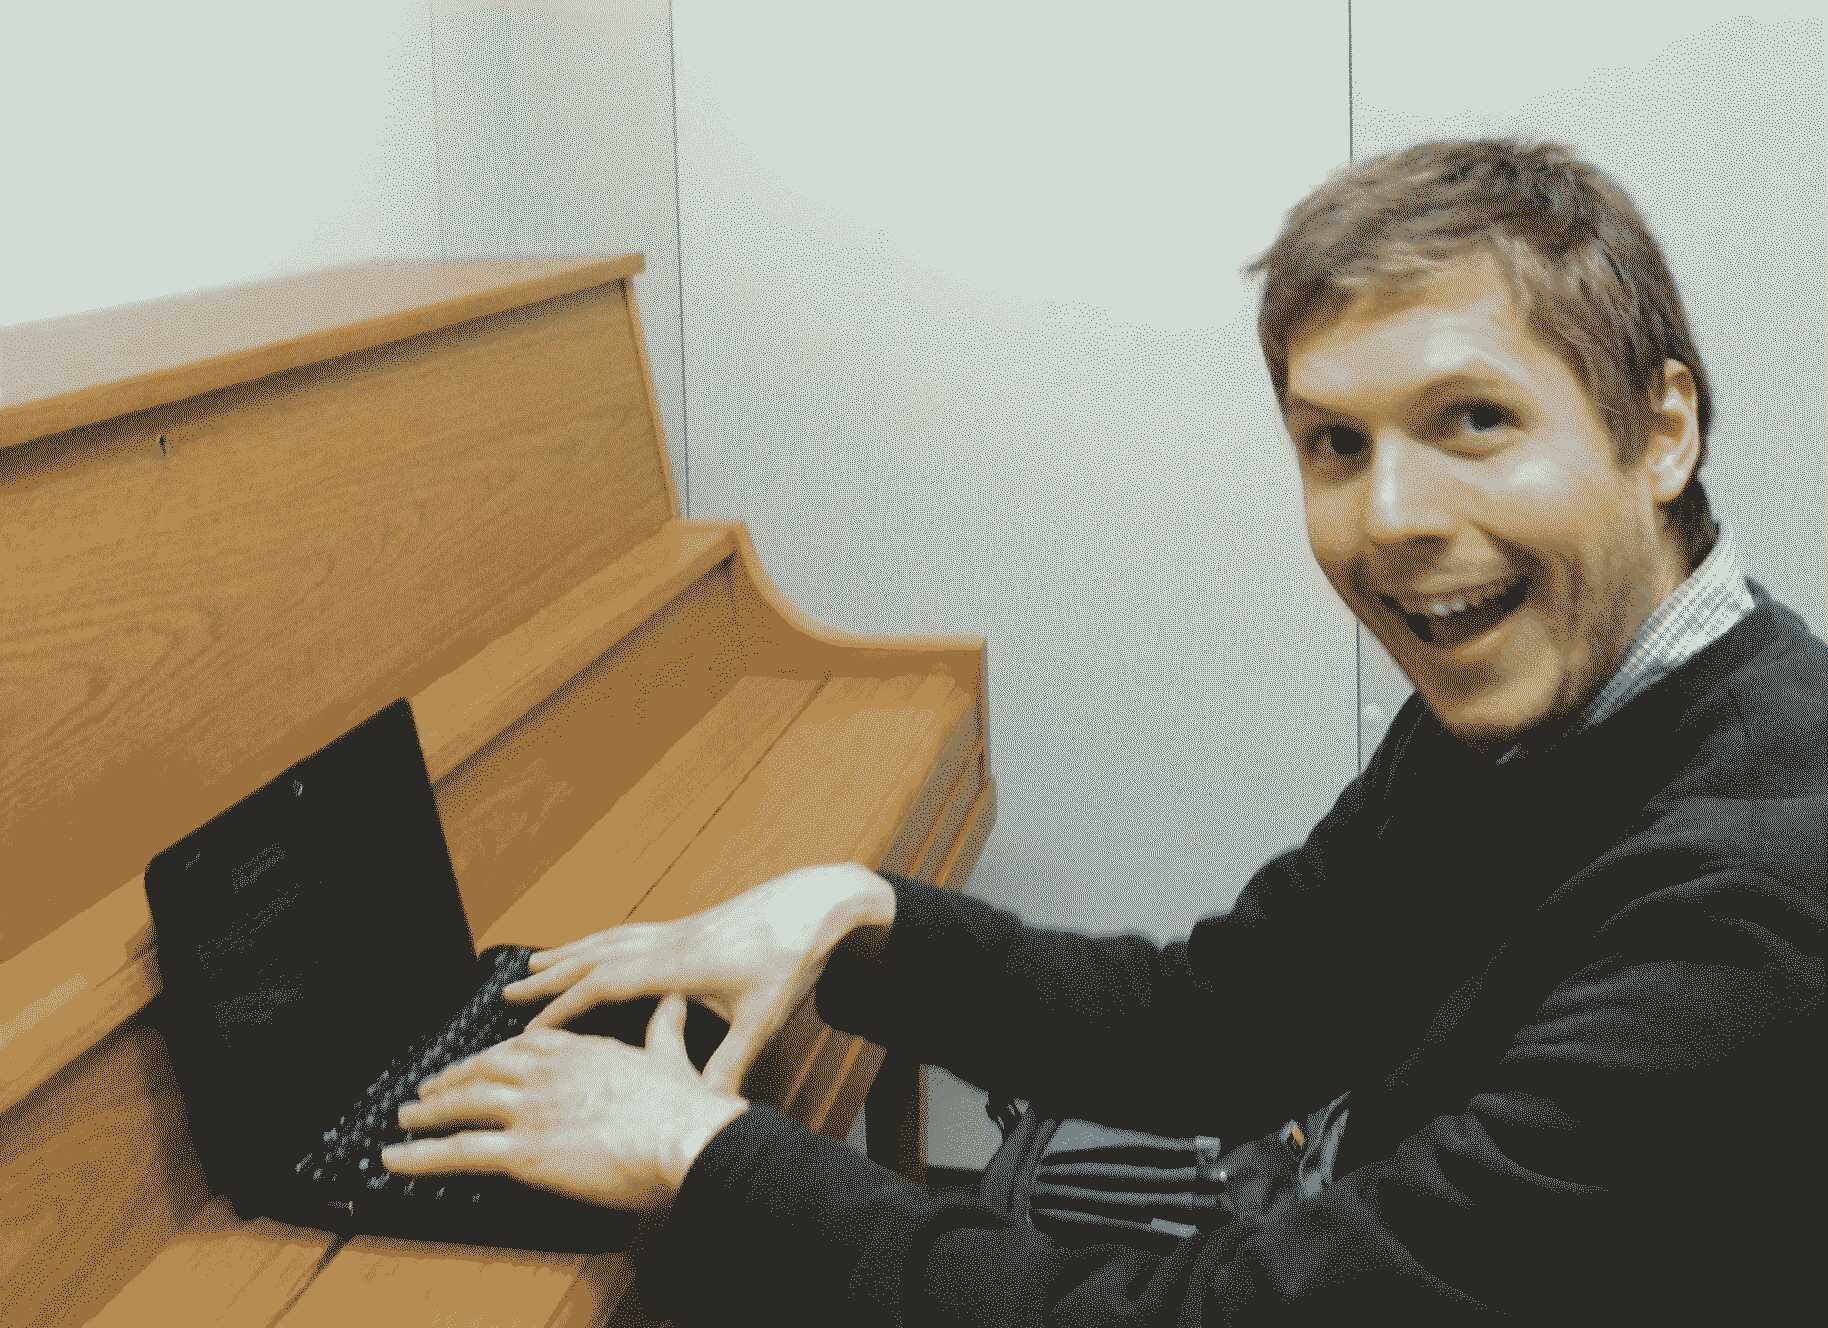 A photo of me sitting at a piano with a netbook on the keyboard making a dumb face